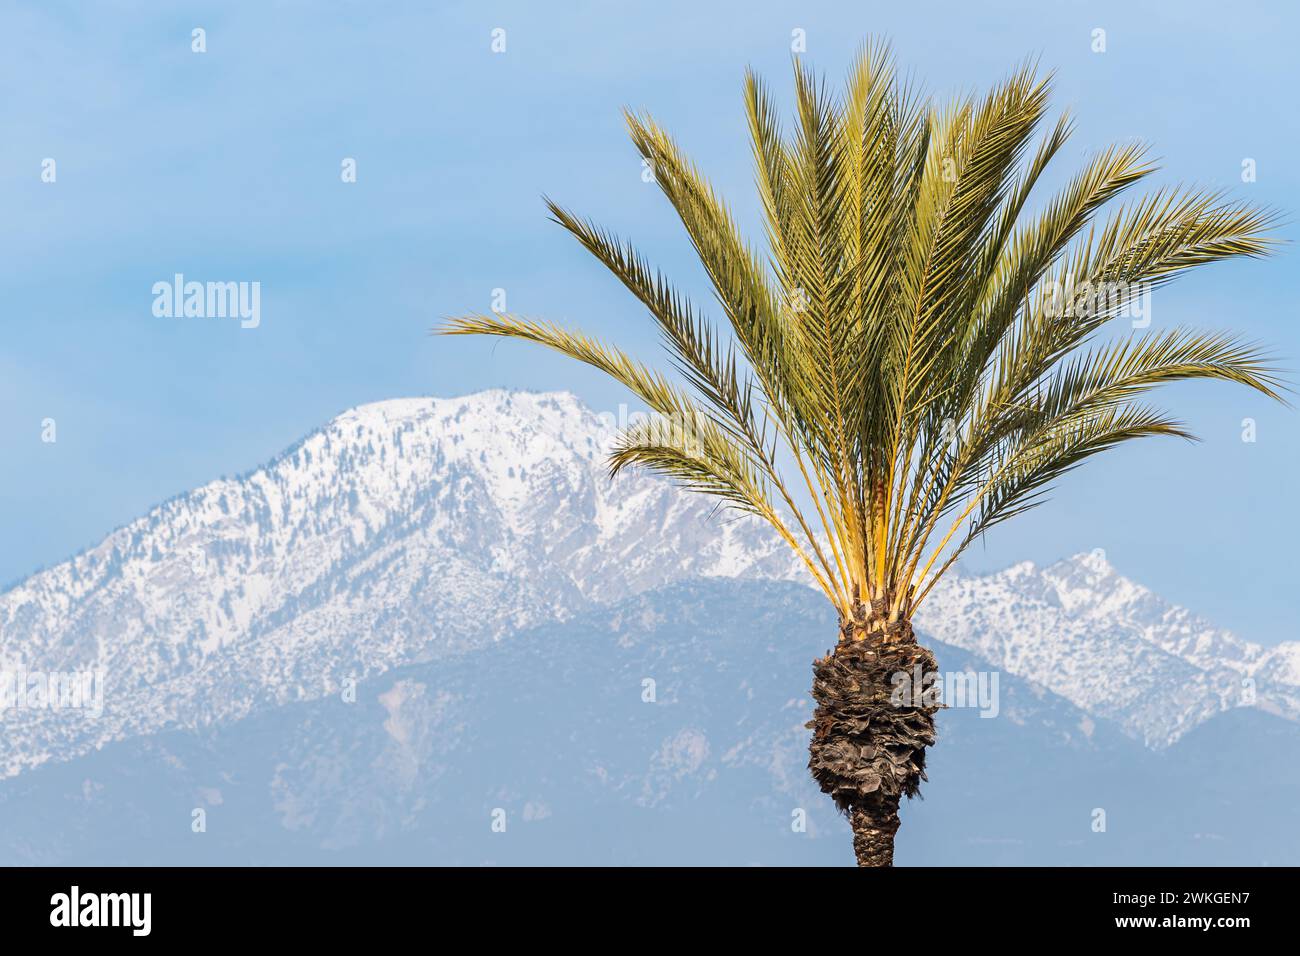 Foreground frame right: Palm tree. Middle ground: San Gabriel foothills. Background: snow-covered 8,862-foot Cucamonga Peak in Southern California. Stock Photo